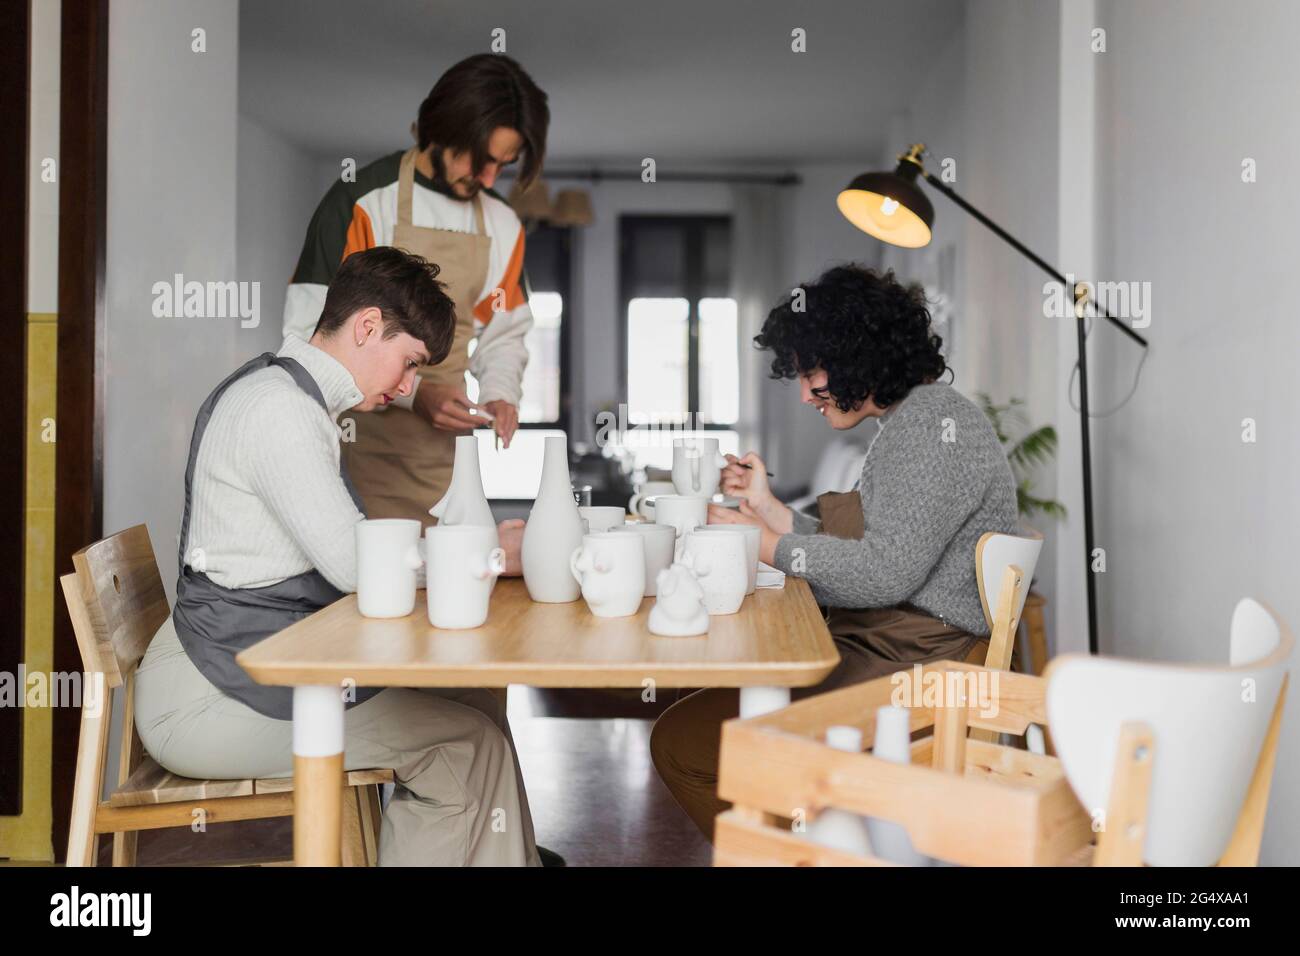 Male and female experts painting ceramics crockery at workplace Stock Photo